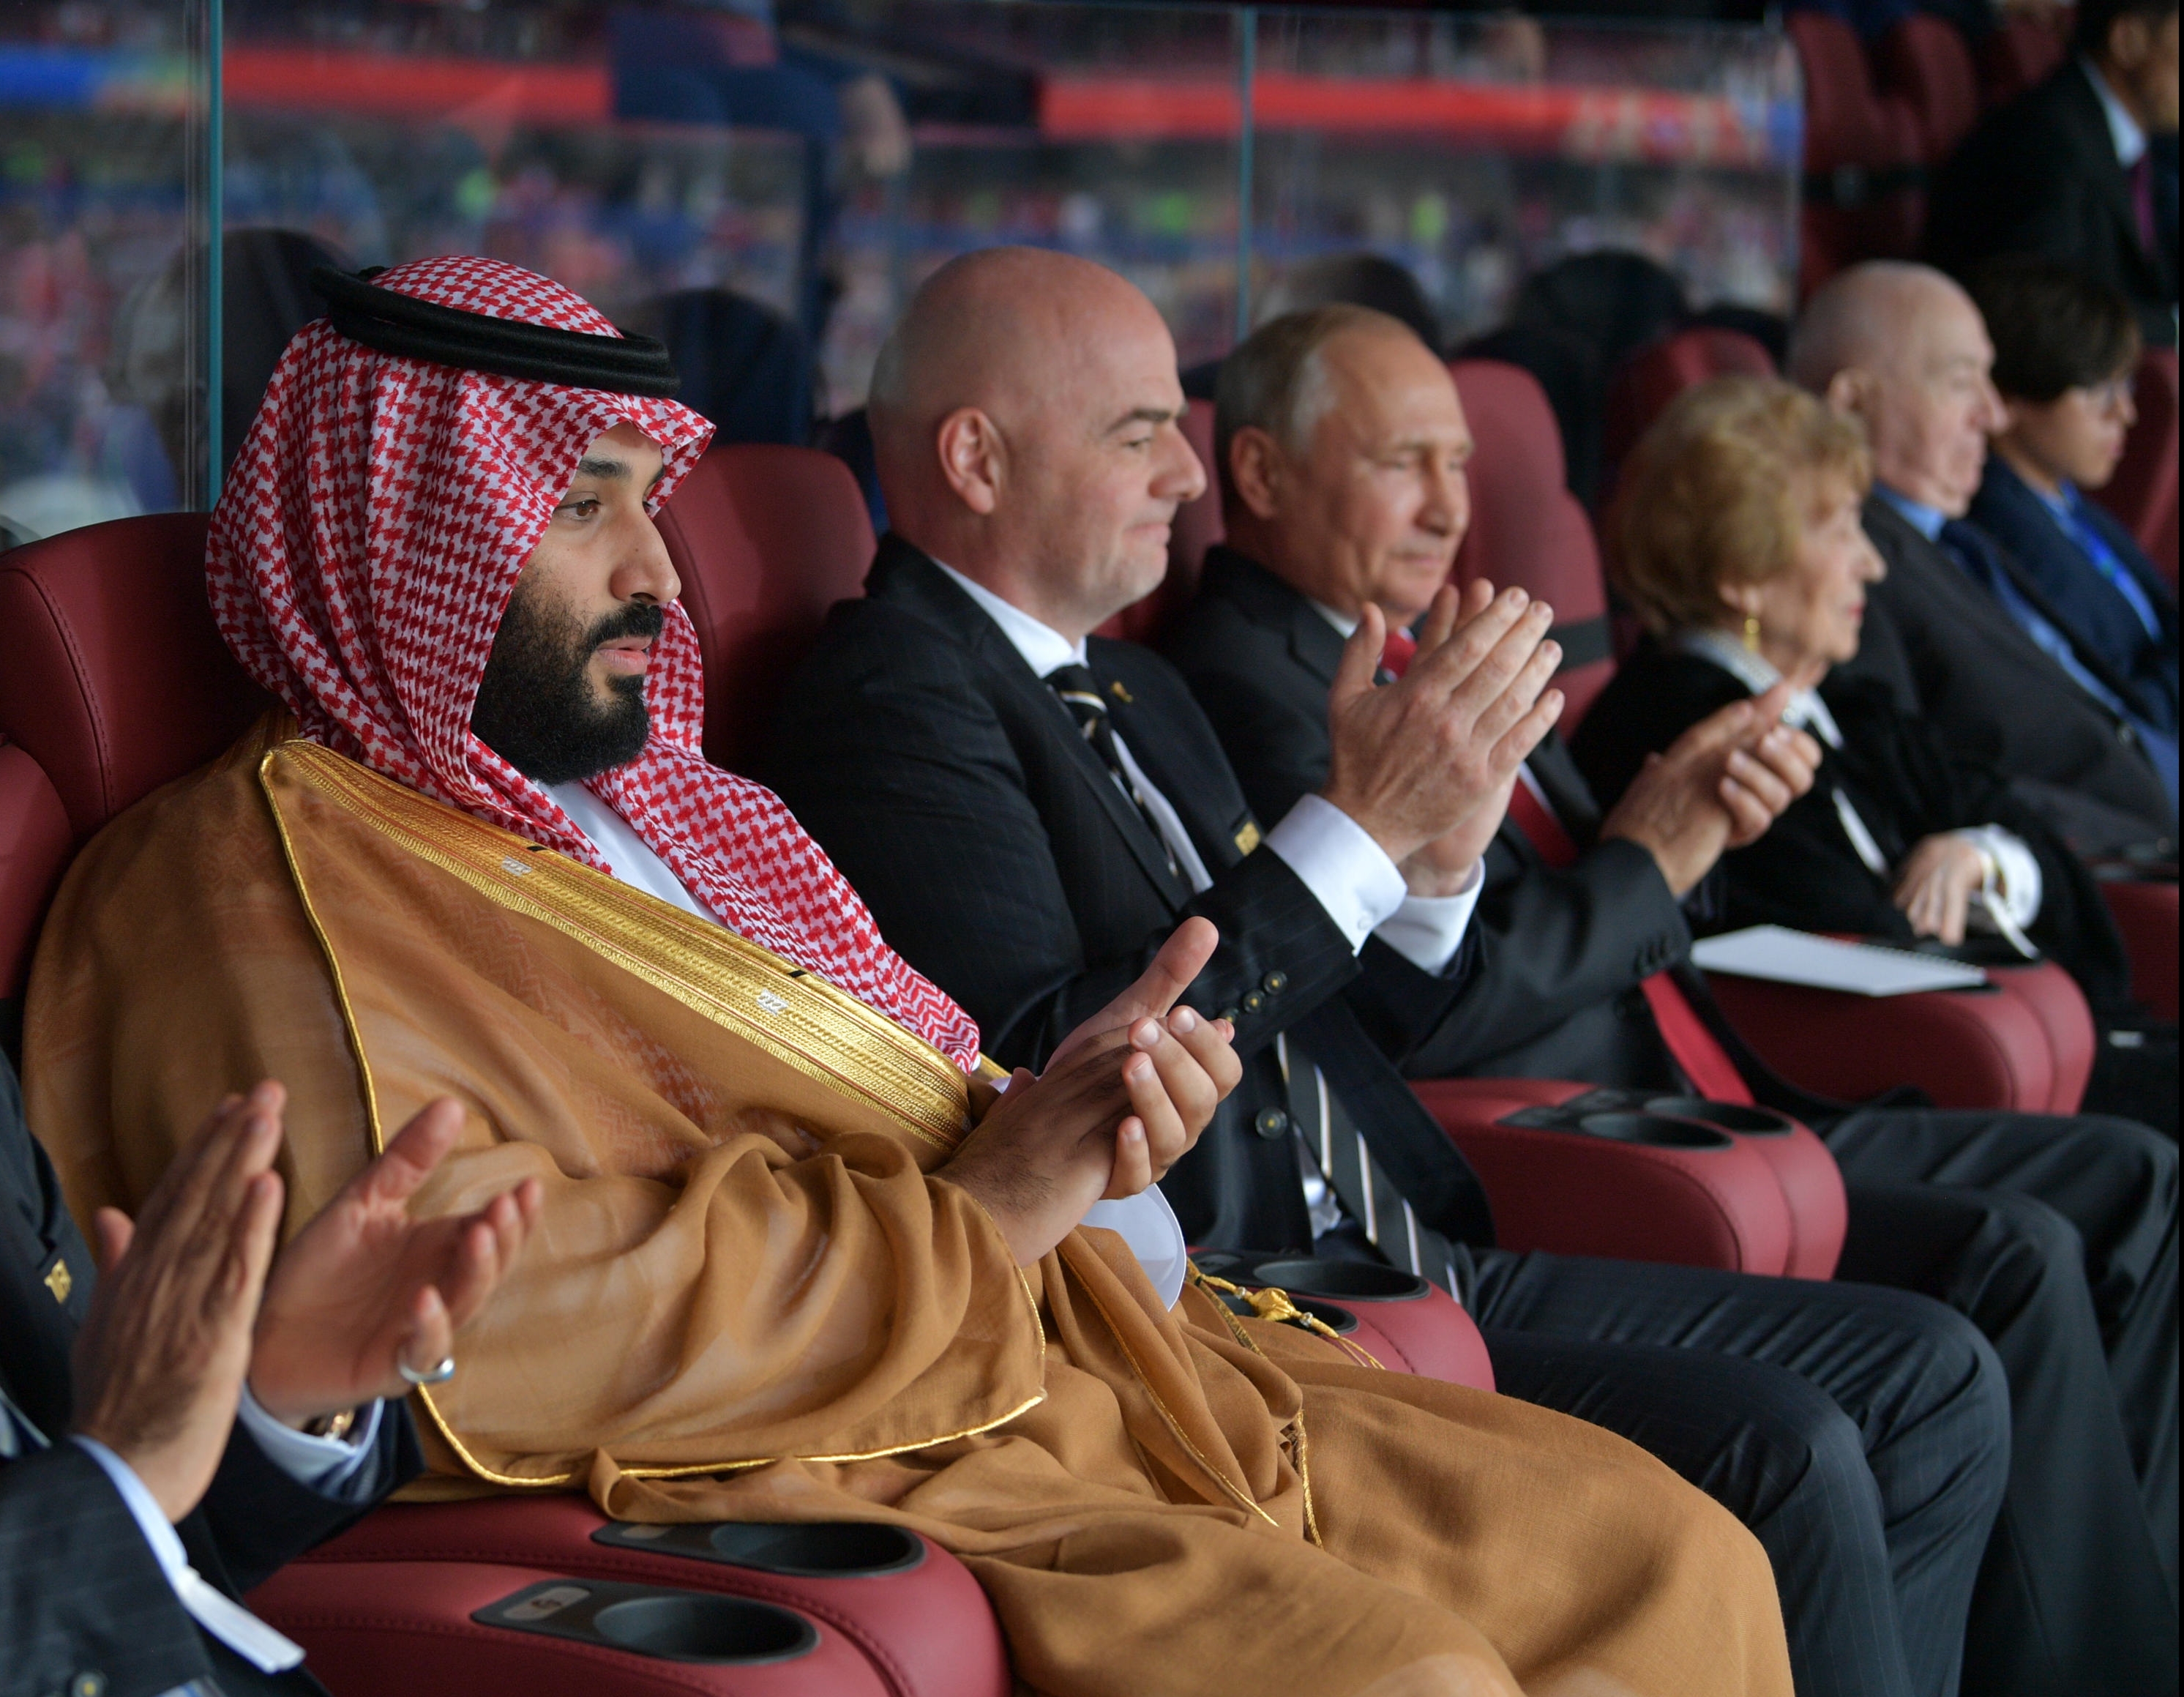 Saudi Crown Prince Mohammed bin Salman (L) - next Manchester United owner?  (Photo by ALEXEY DRUZHININ/AFP/Getty Images)